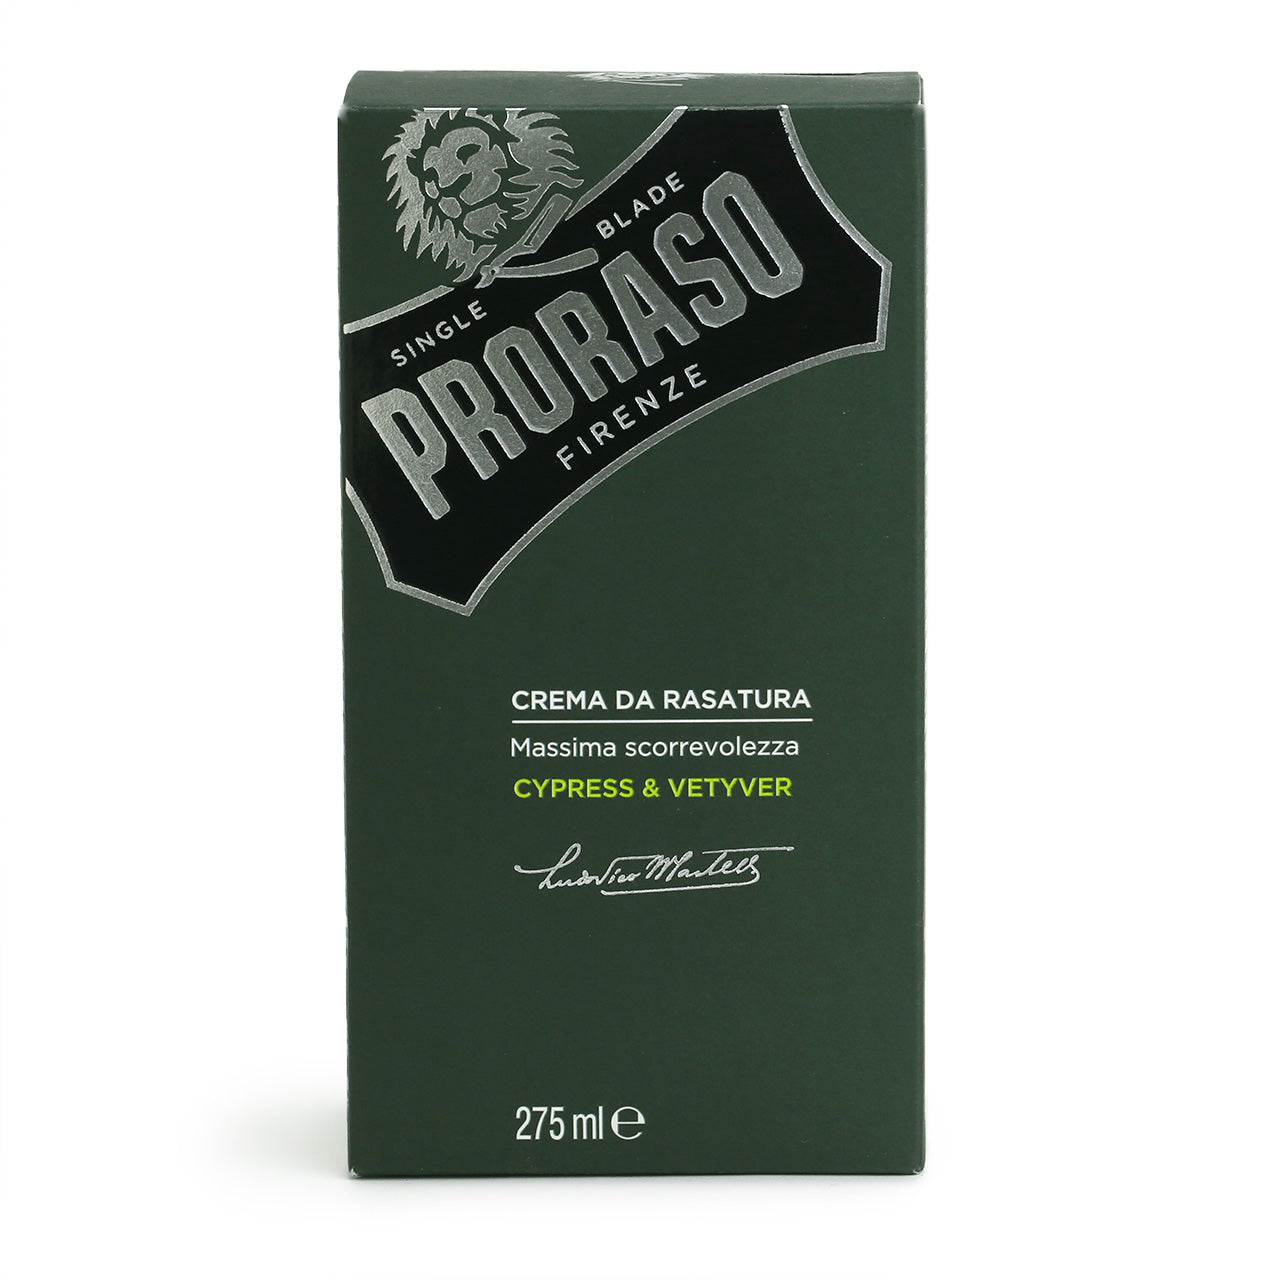 The dark green outer box of the Proraso Cypress & Vetyver shaving cream